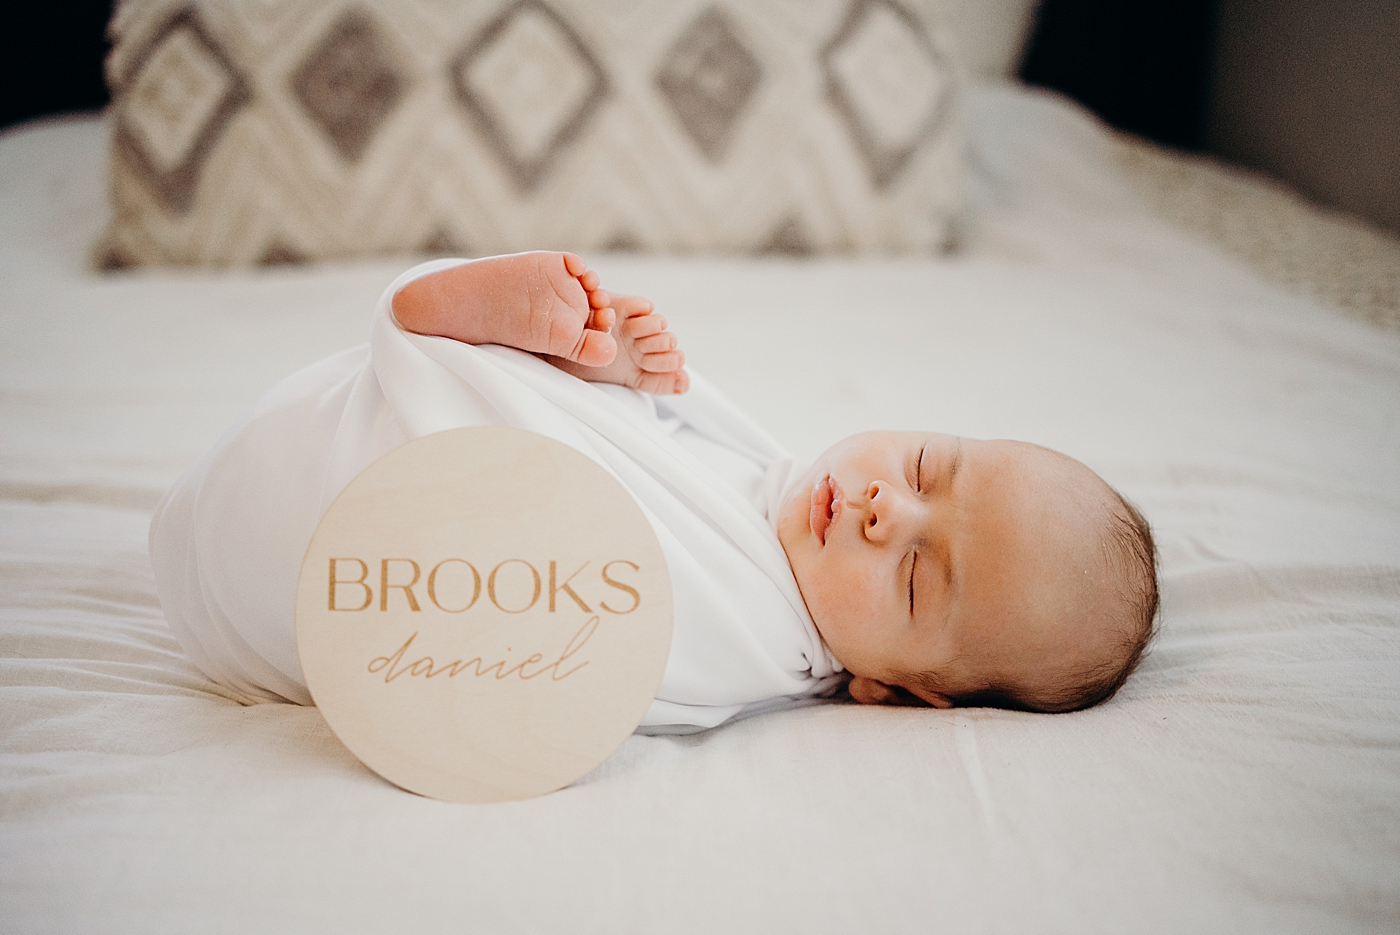 Baby sleeping in swaddle on bed with circle name sign South Florida Newborn Photography captured by South Florida Family Photographer Maggie Alvarez Photography